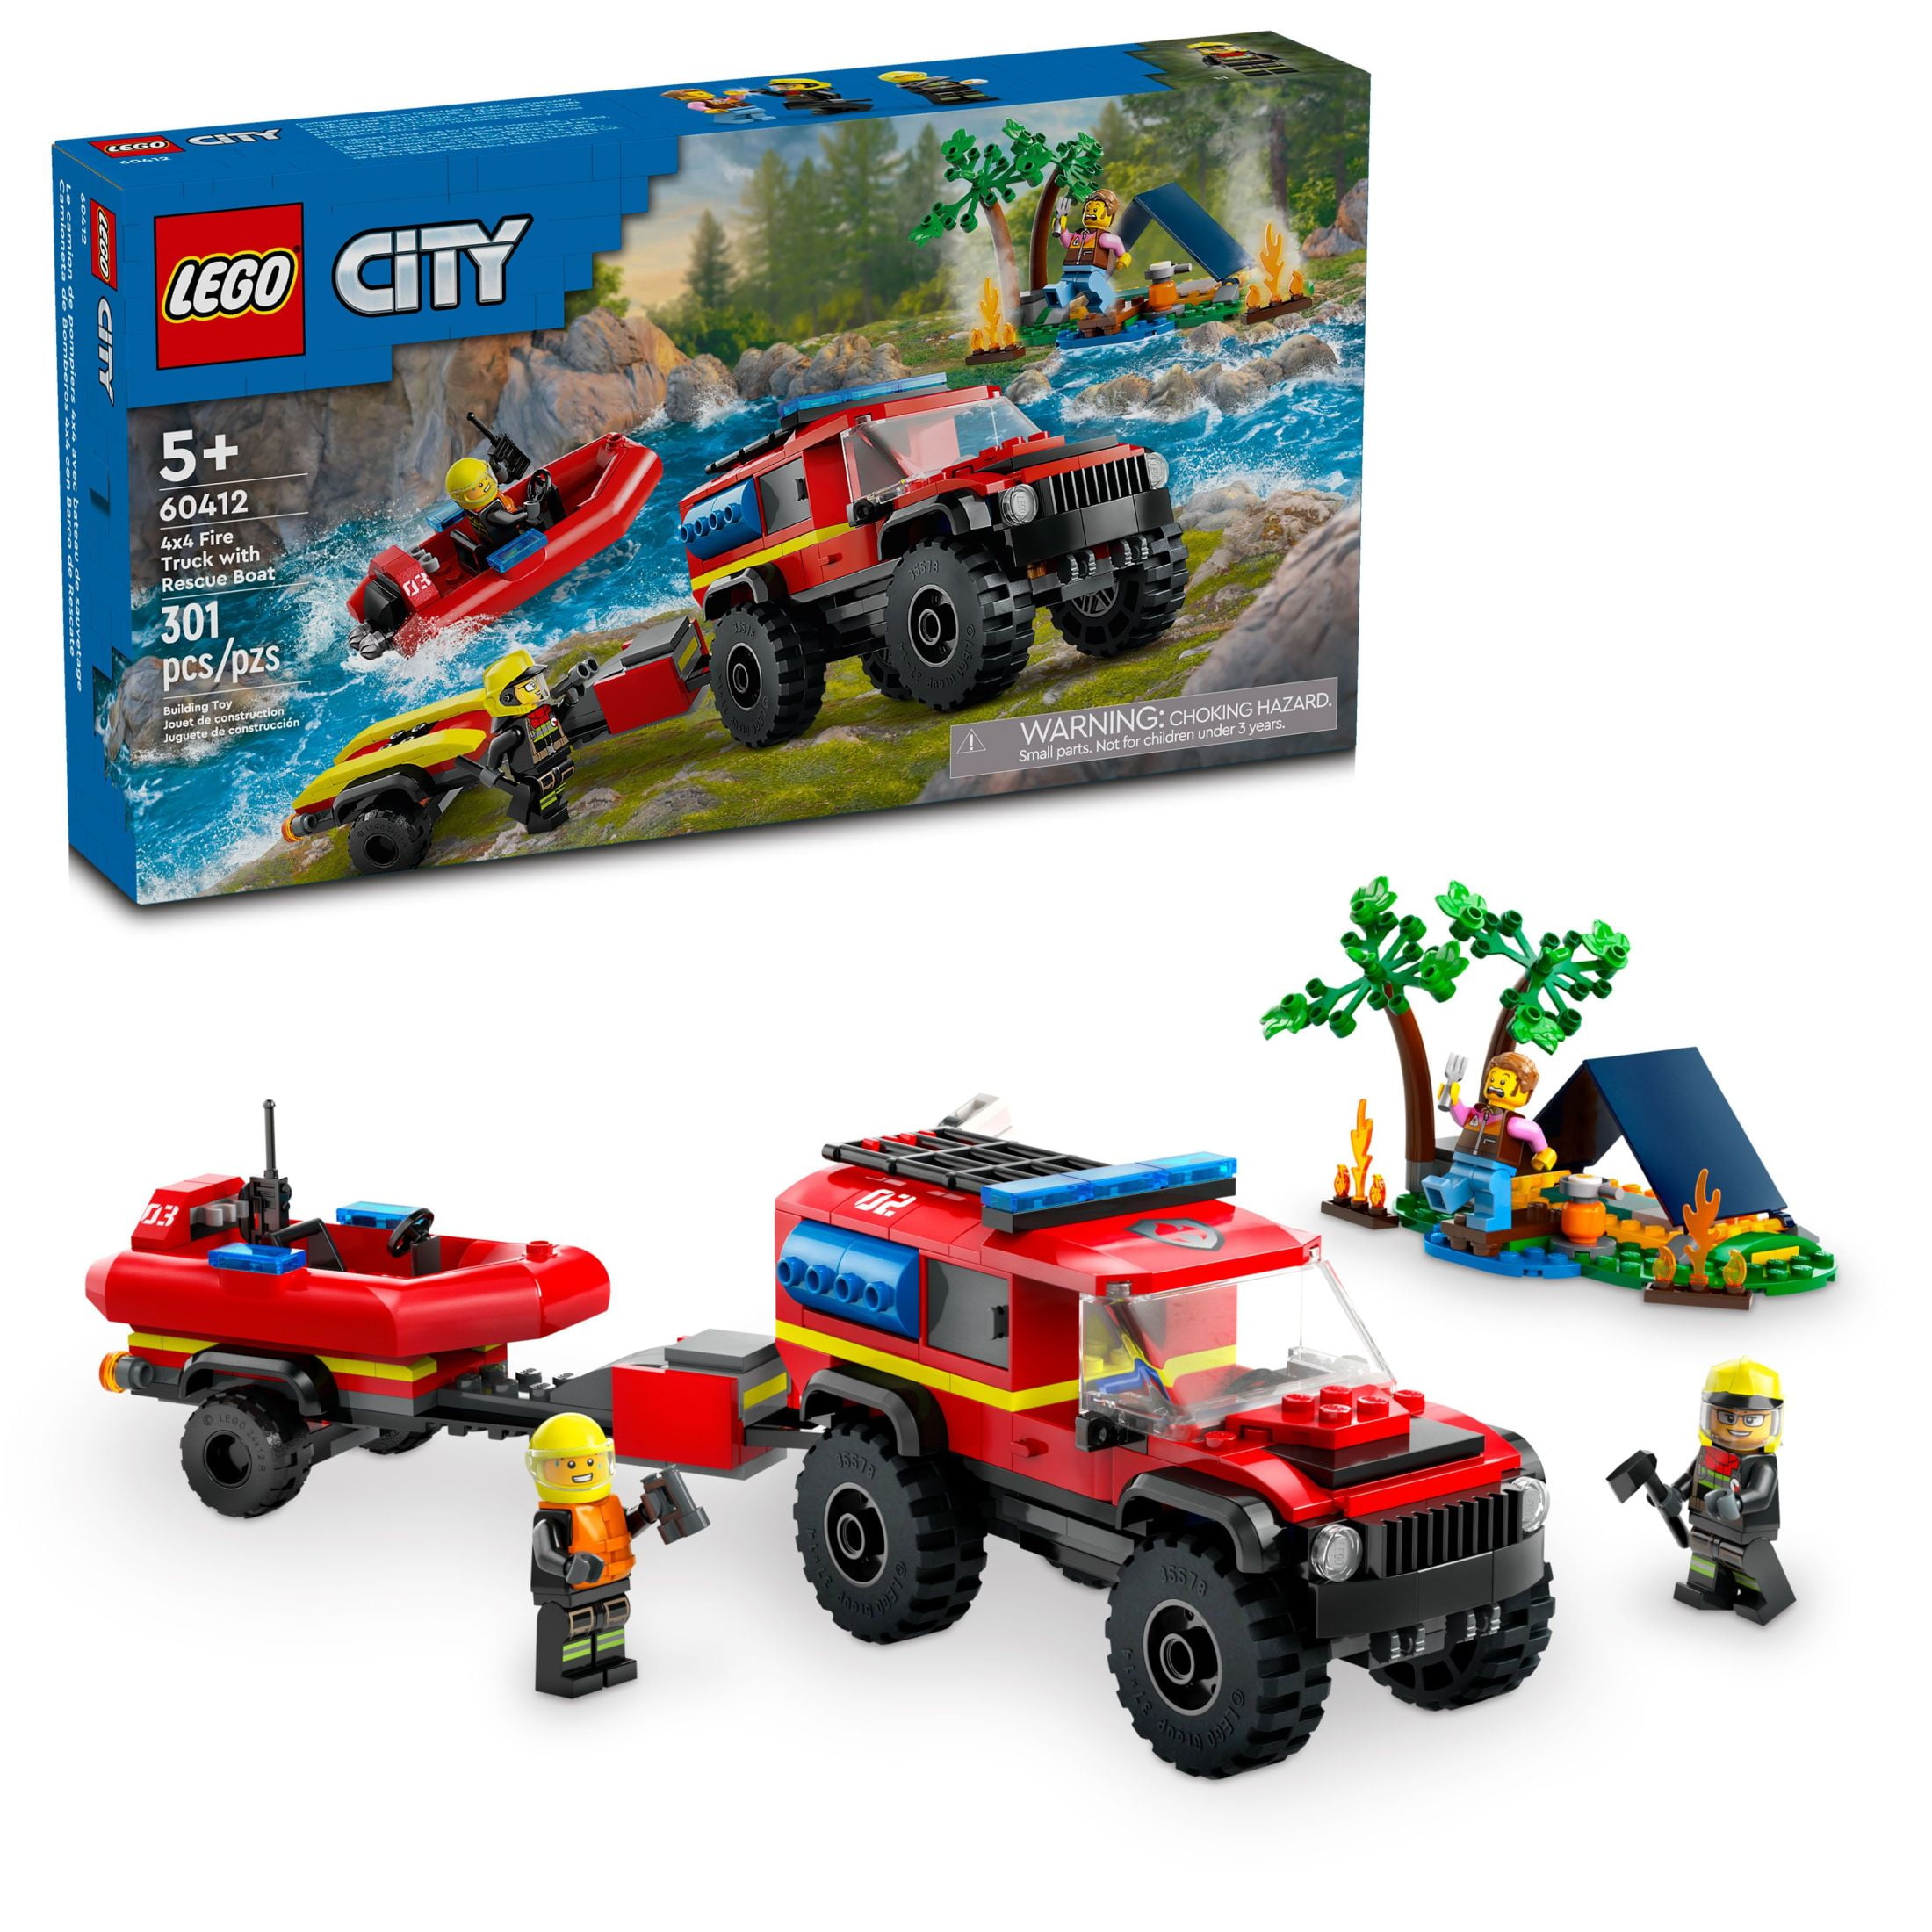 Lego 60412 - City 4x4 Fire Truck with Rescue Boat